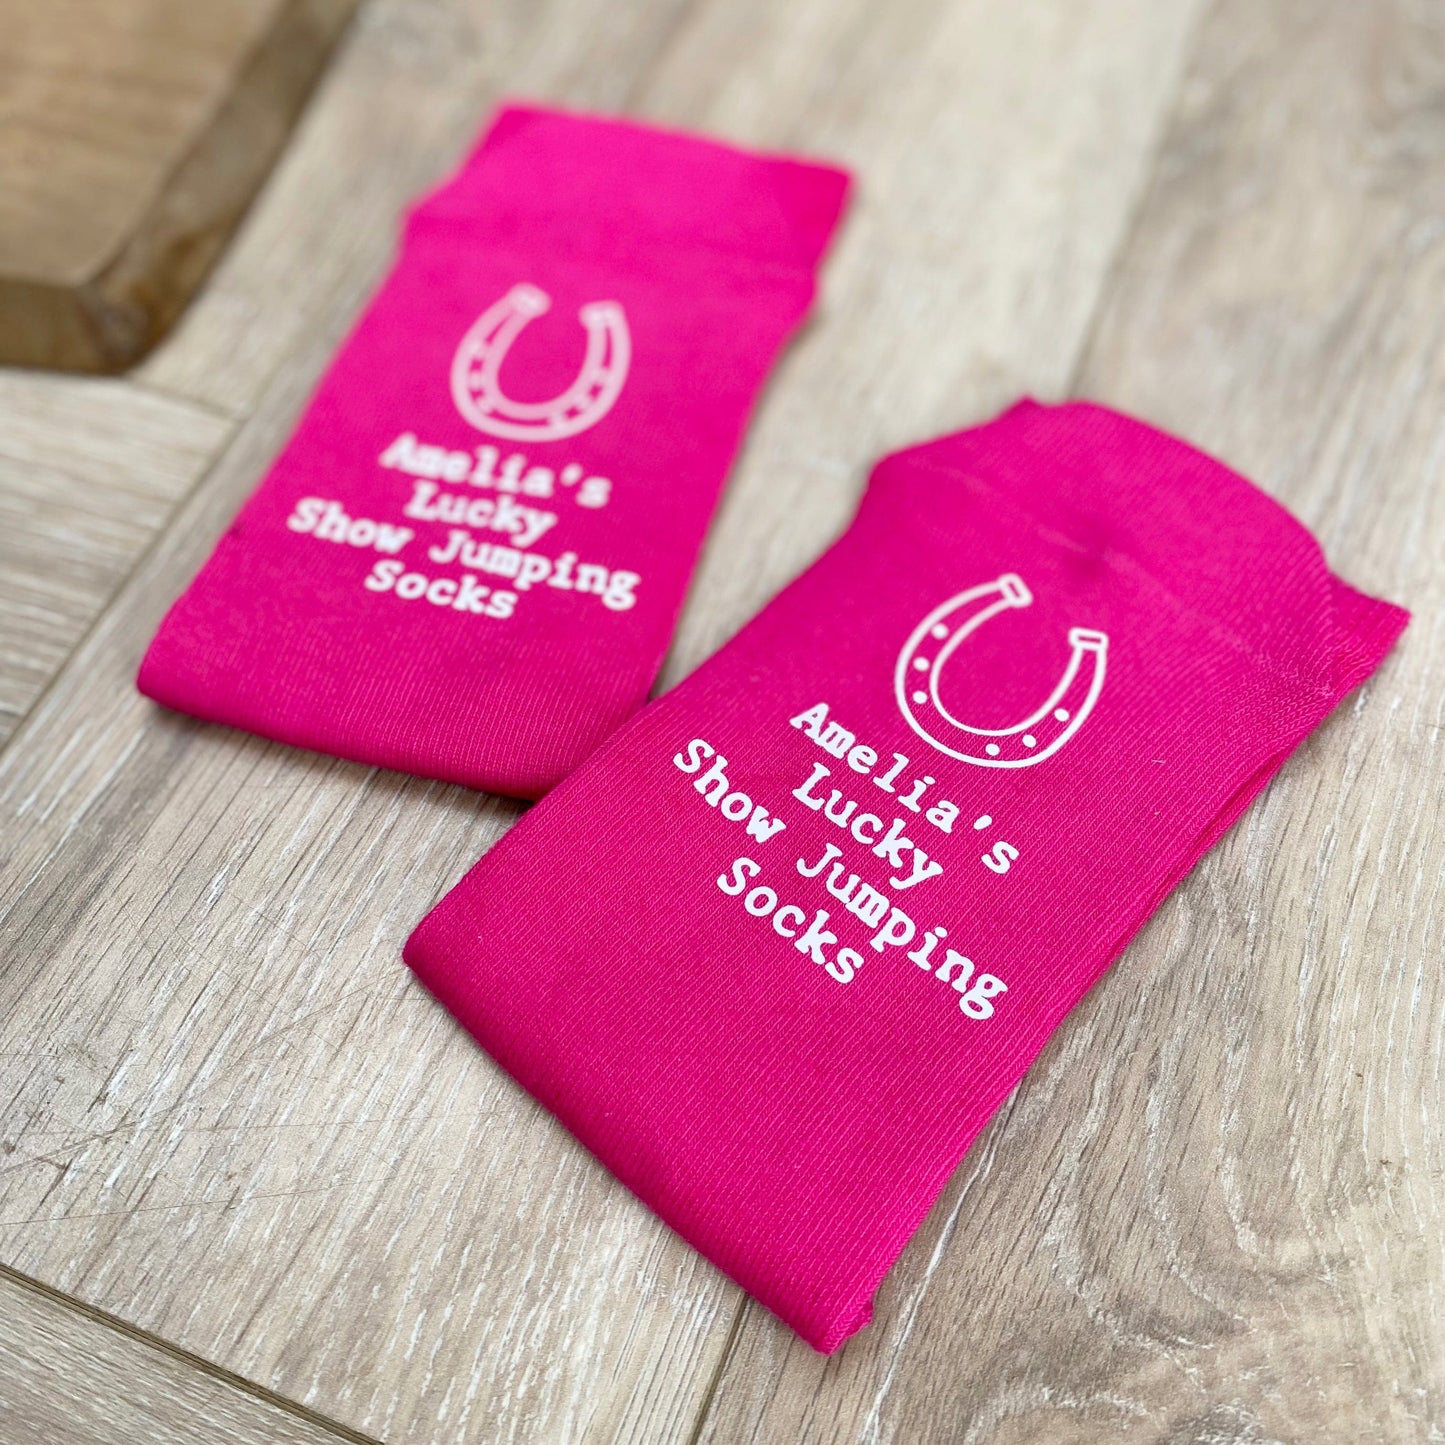 Lucky Horse Riding Competition Socks